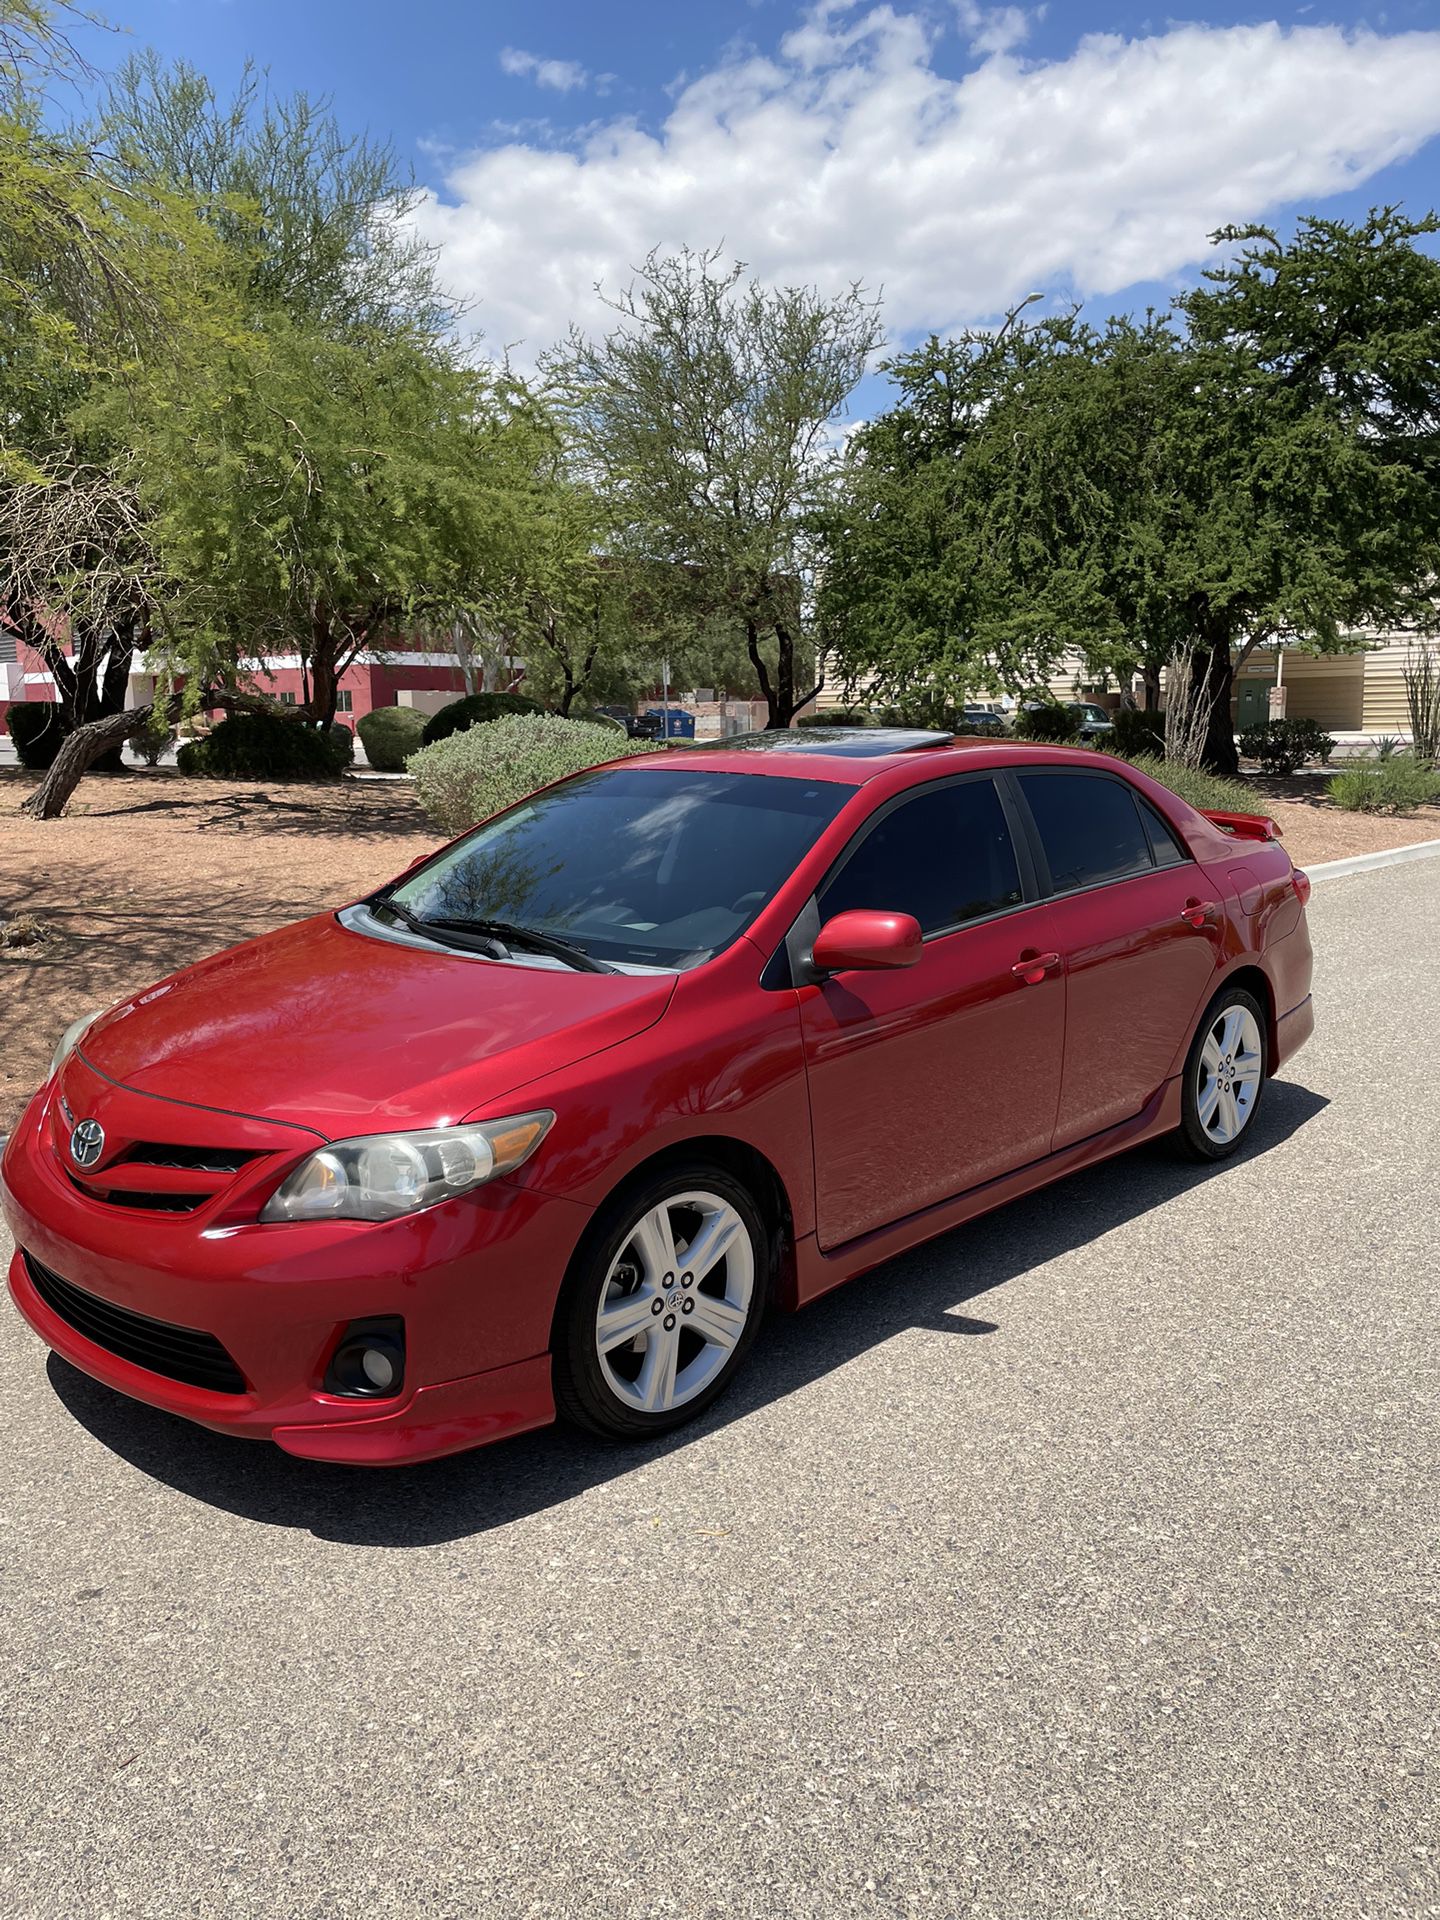 2013 Toyota Corolla for Sale in North Las Vegas, NV - OfferUp